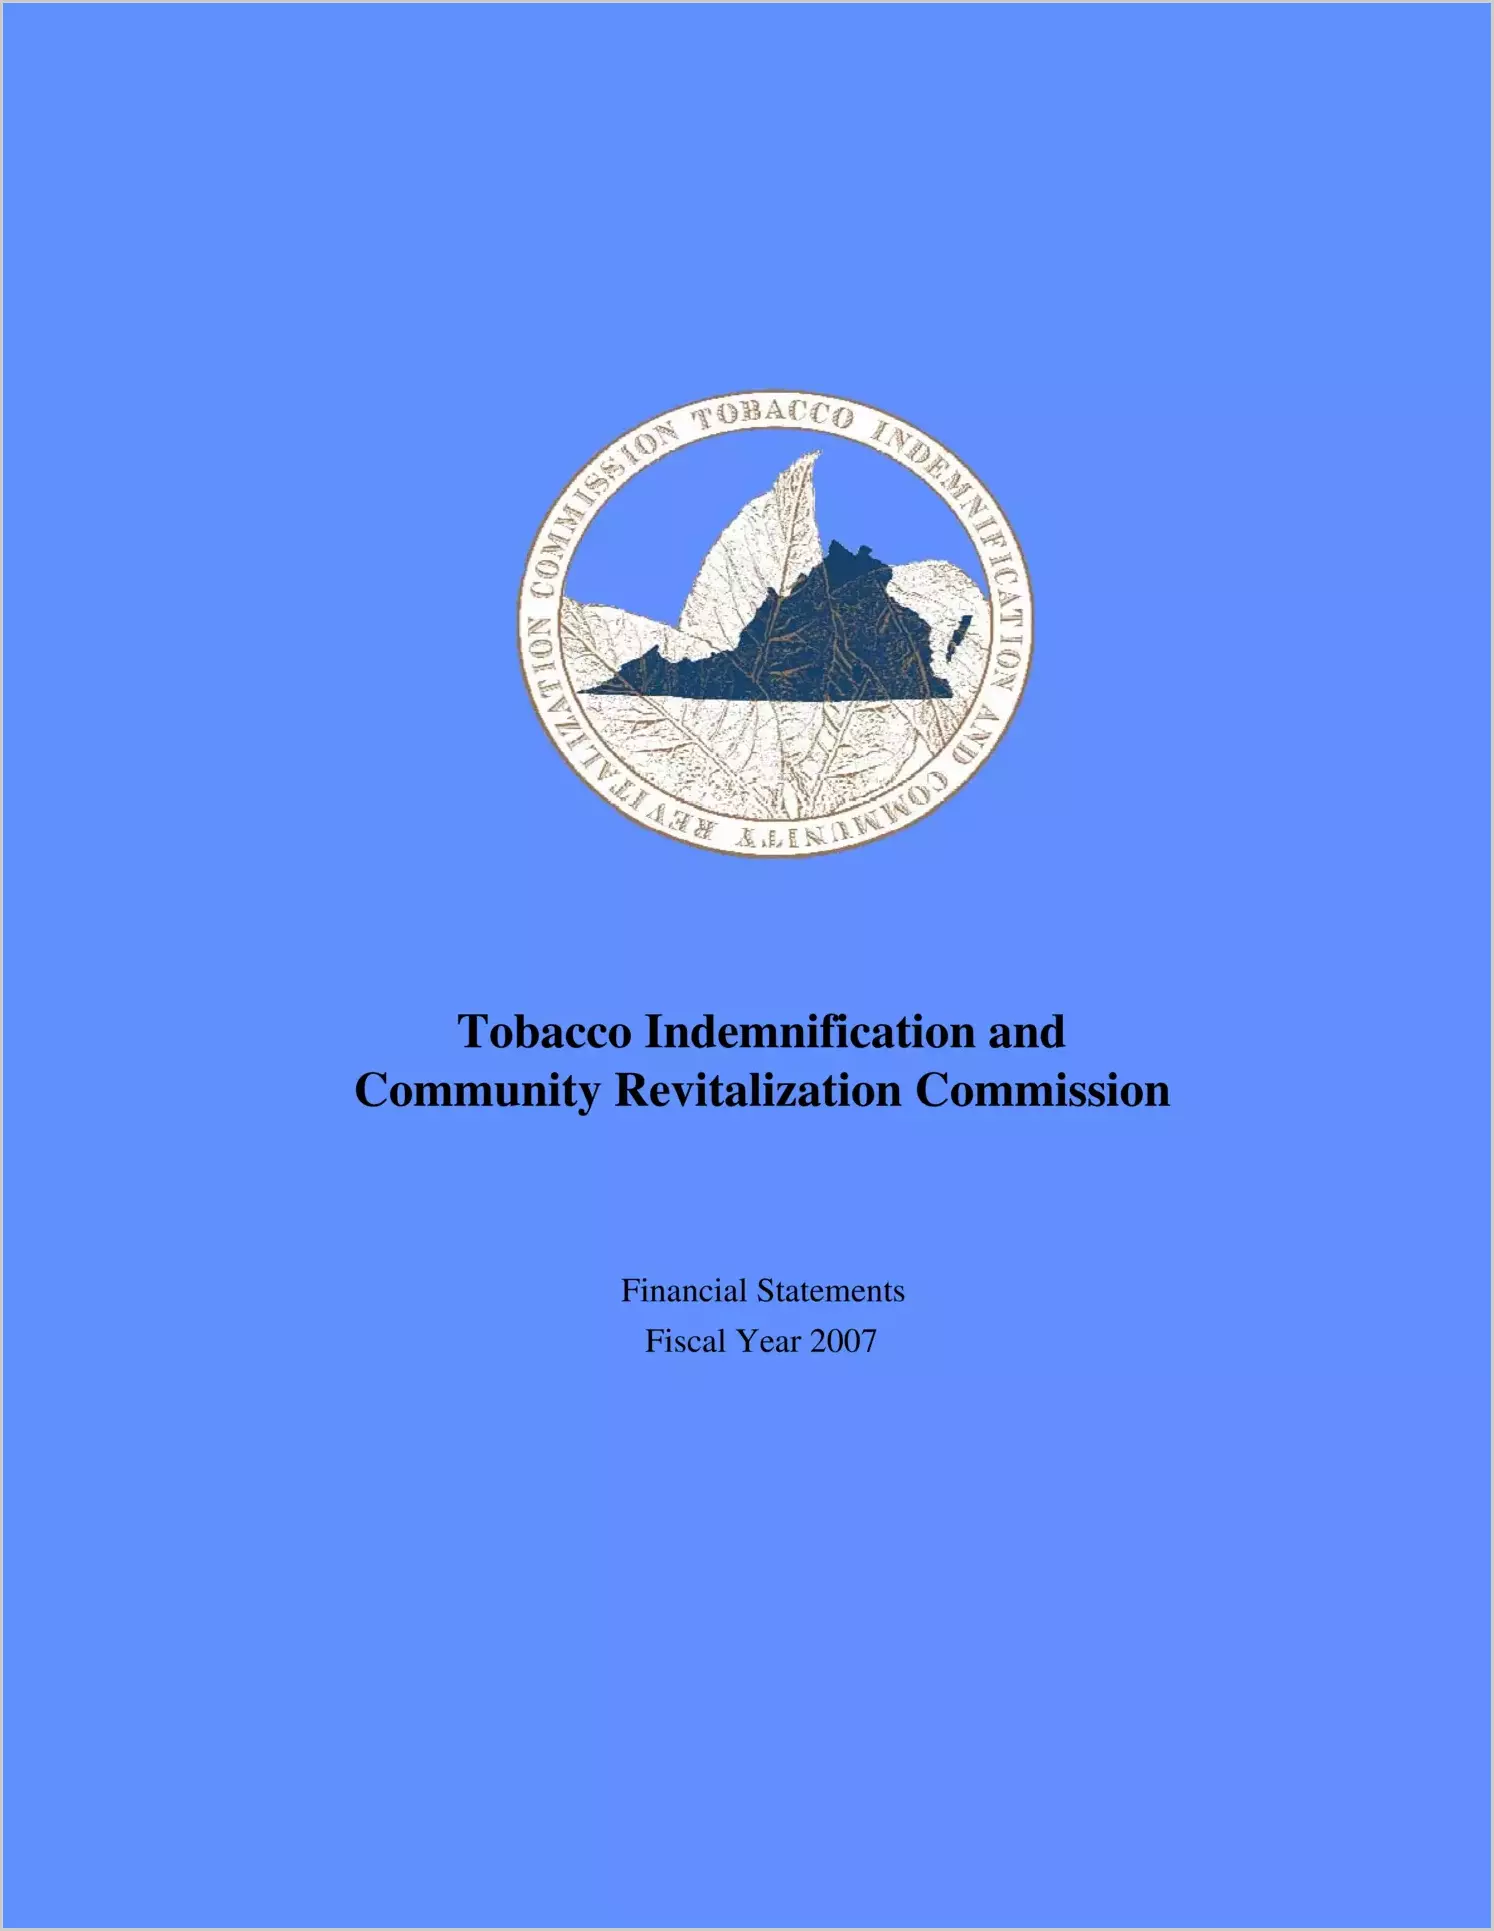 Tobacco Indemnification and Community Revitalization Commission for the year ended June 30, 2007